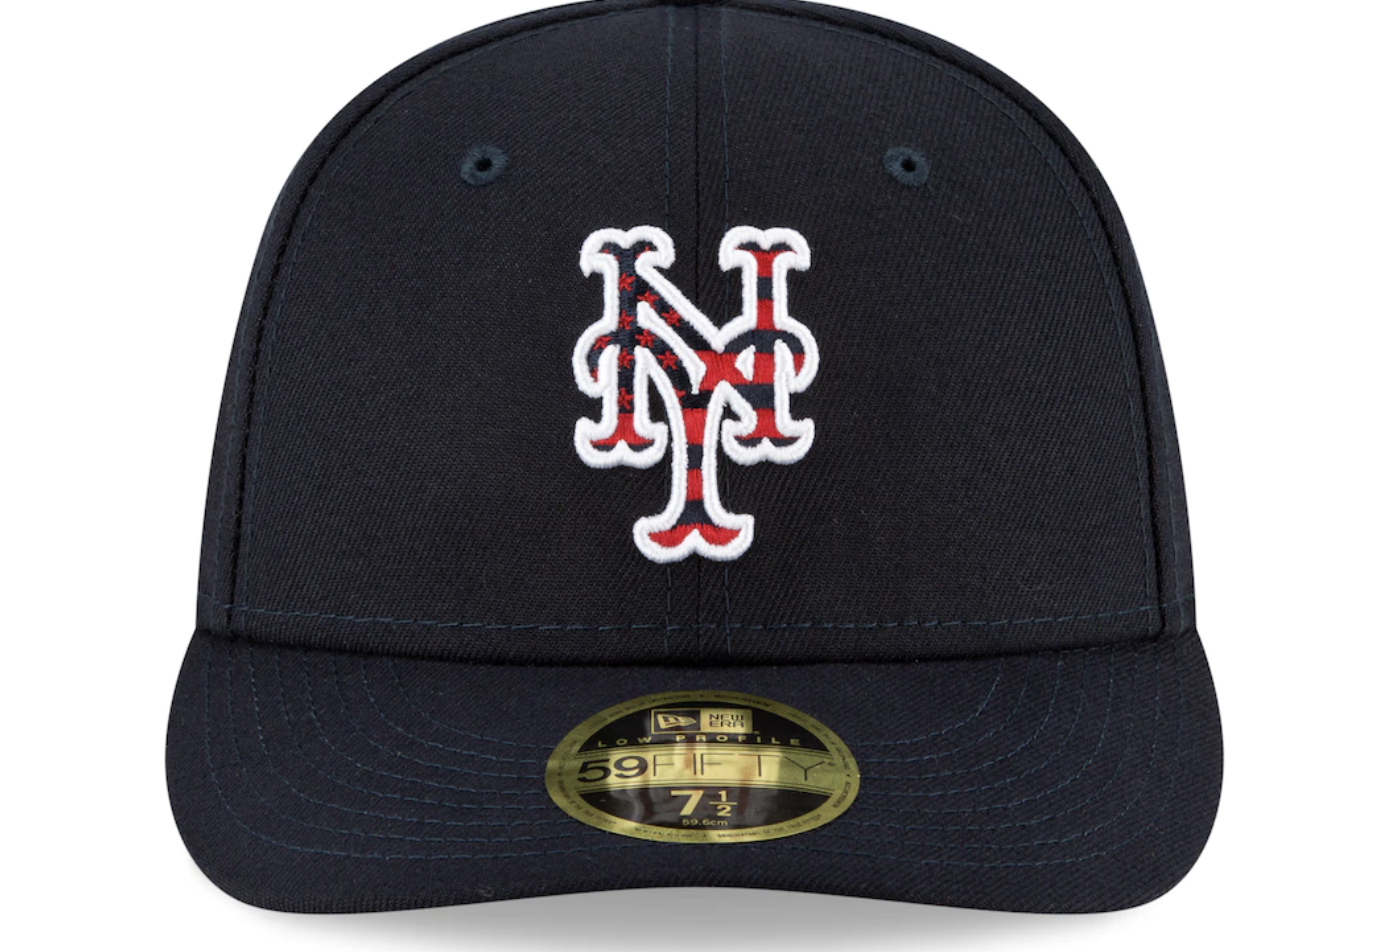 Yankees, Mets Americana hats are here, just in time for the 4th of